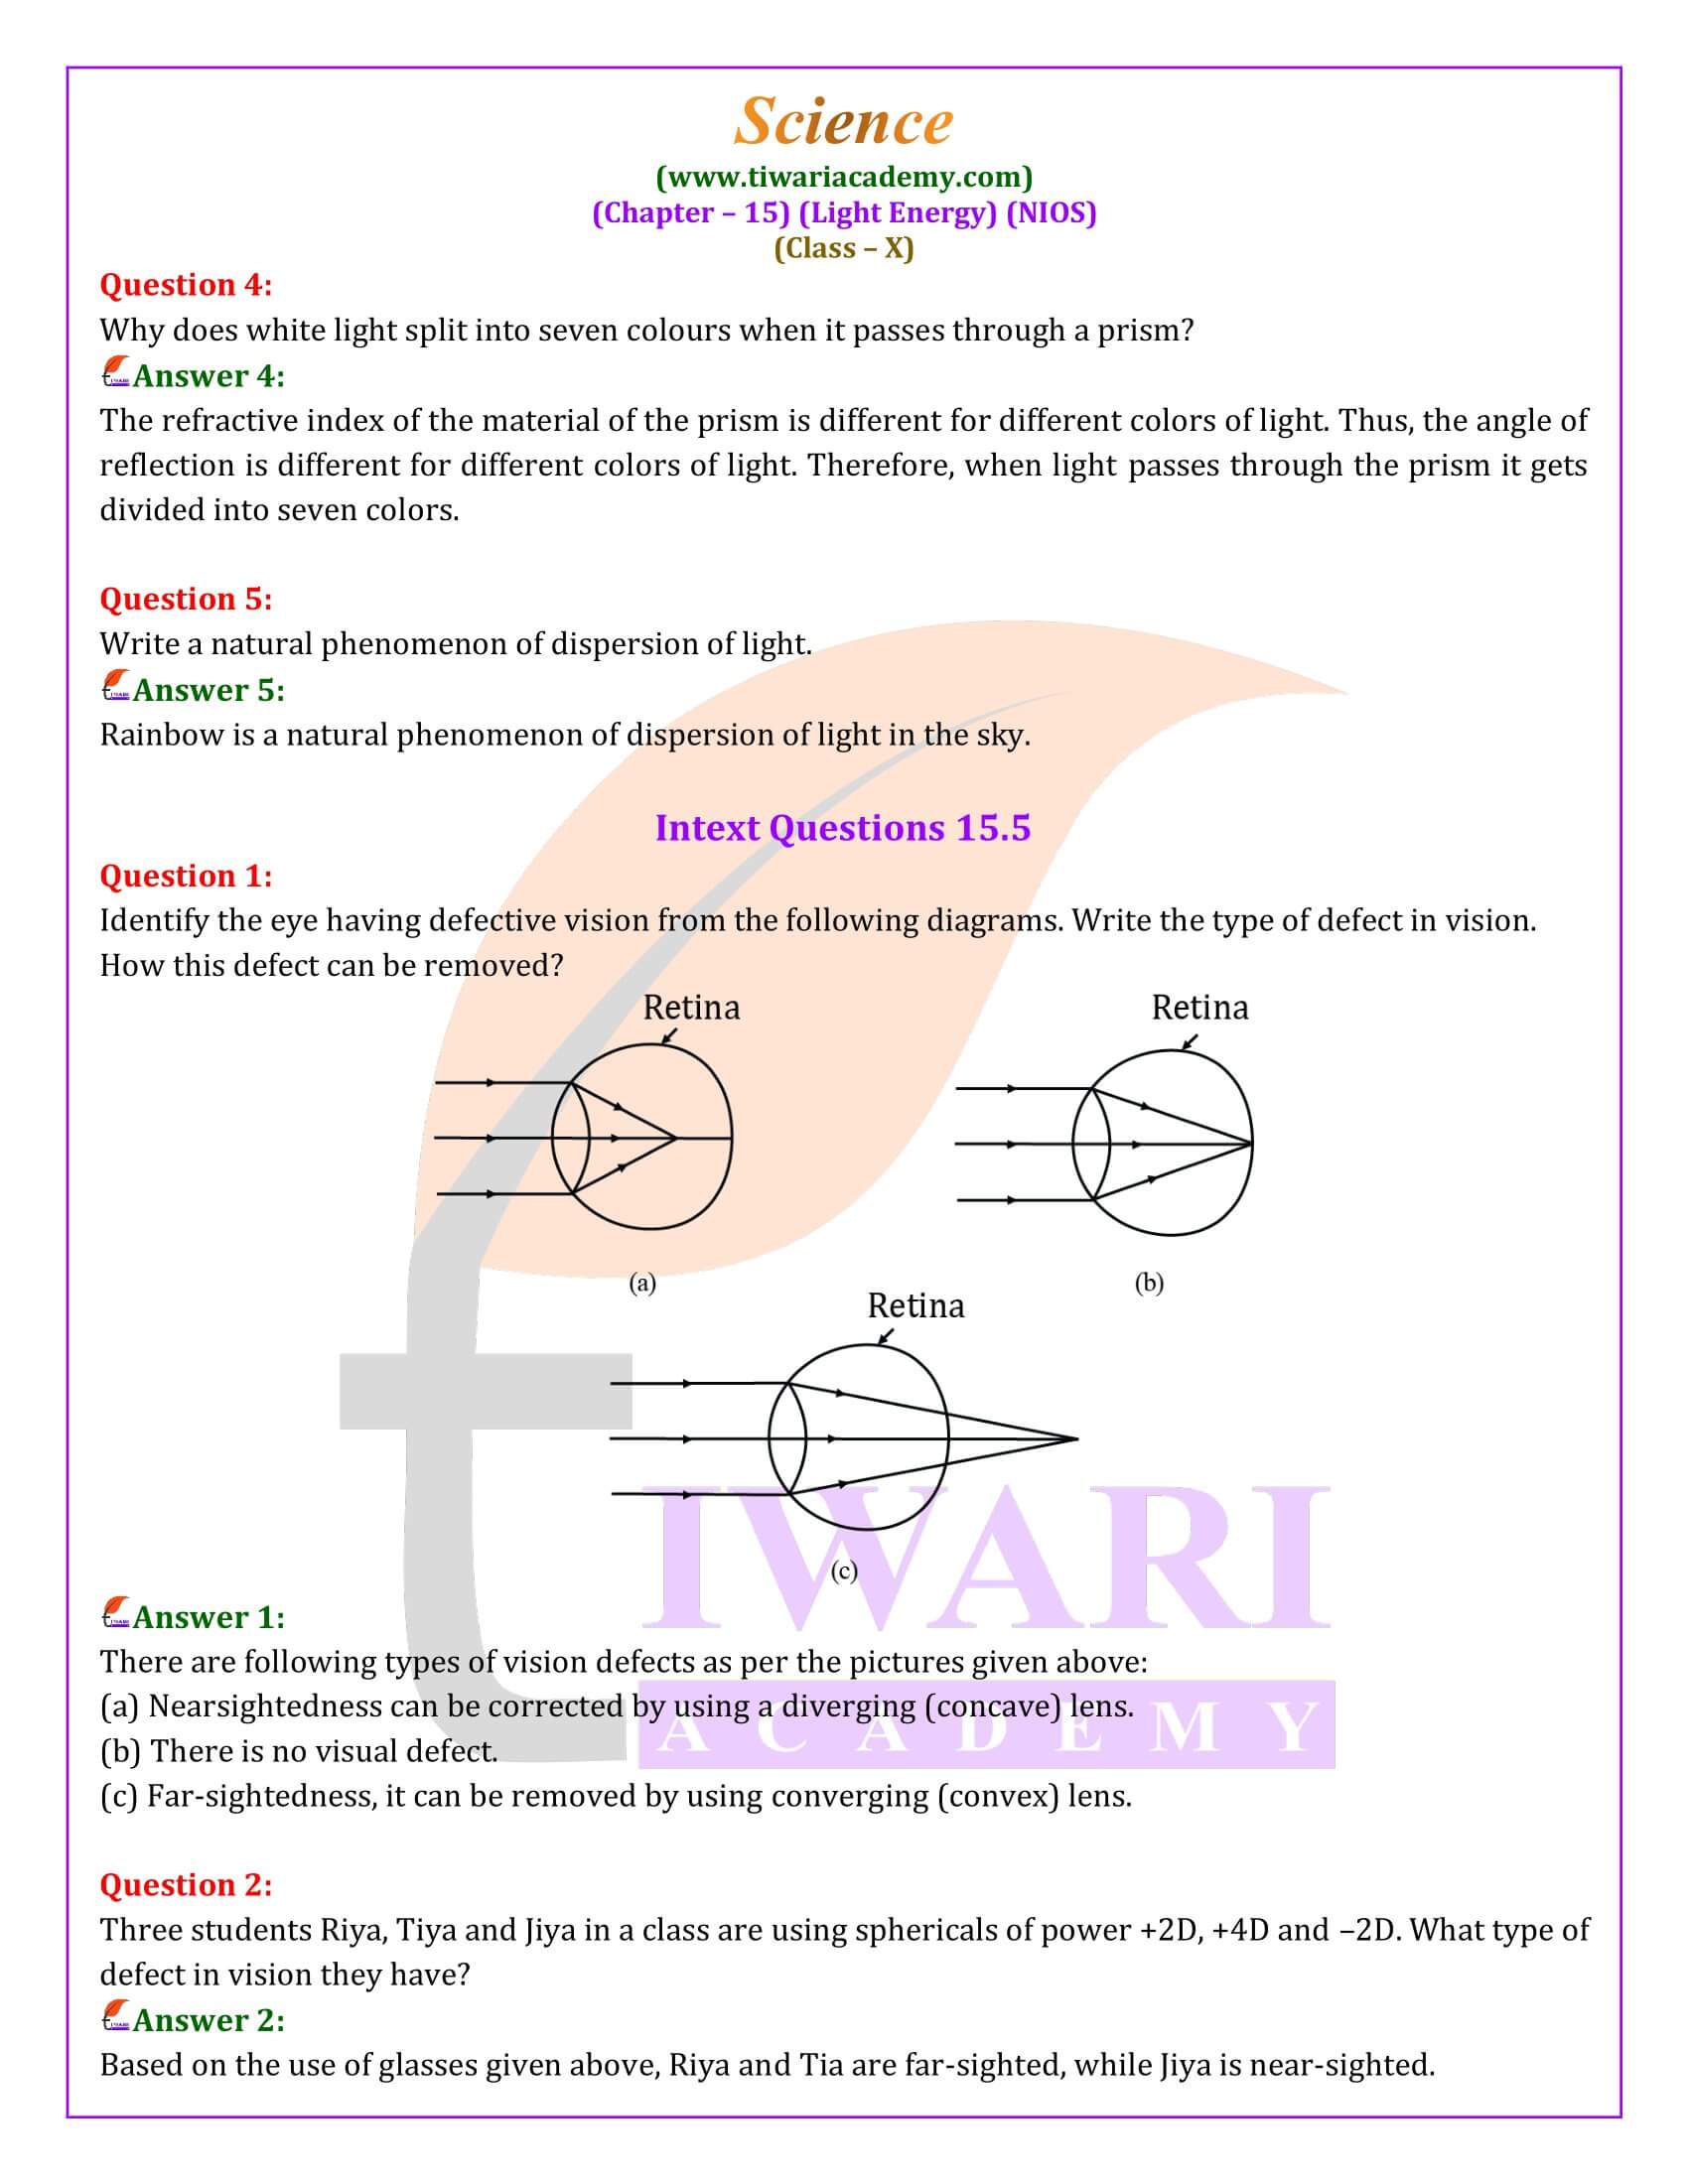 NIOS Class 10 Science Chapter 15 Guide